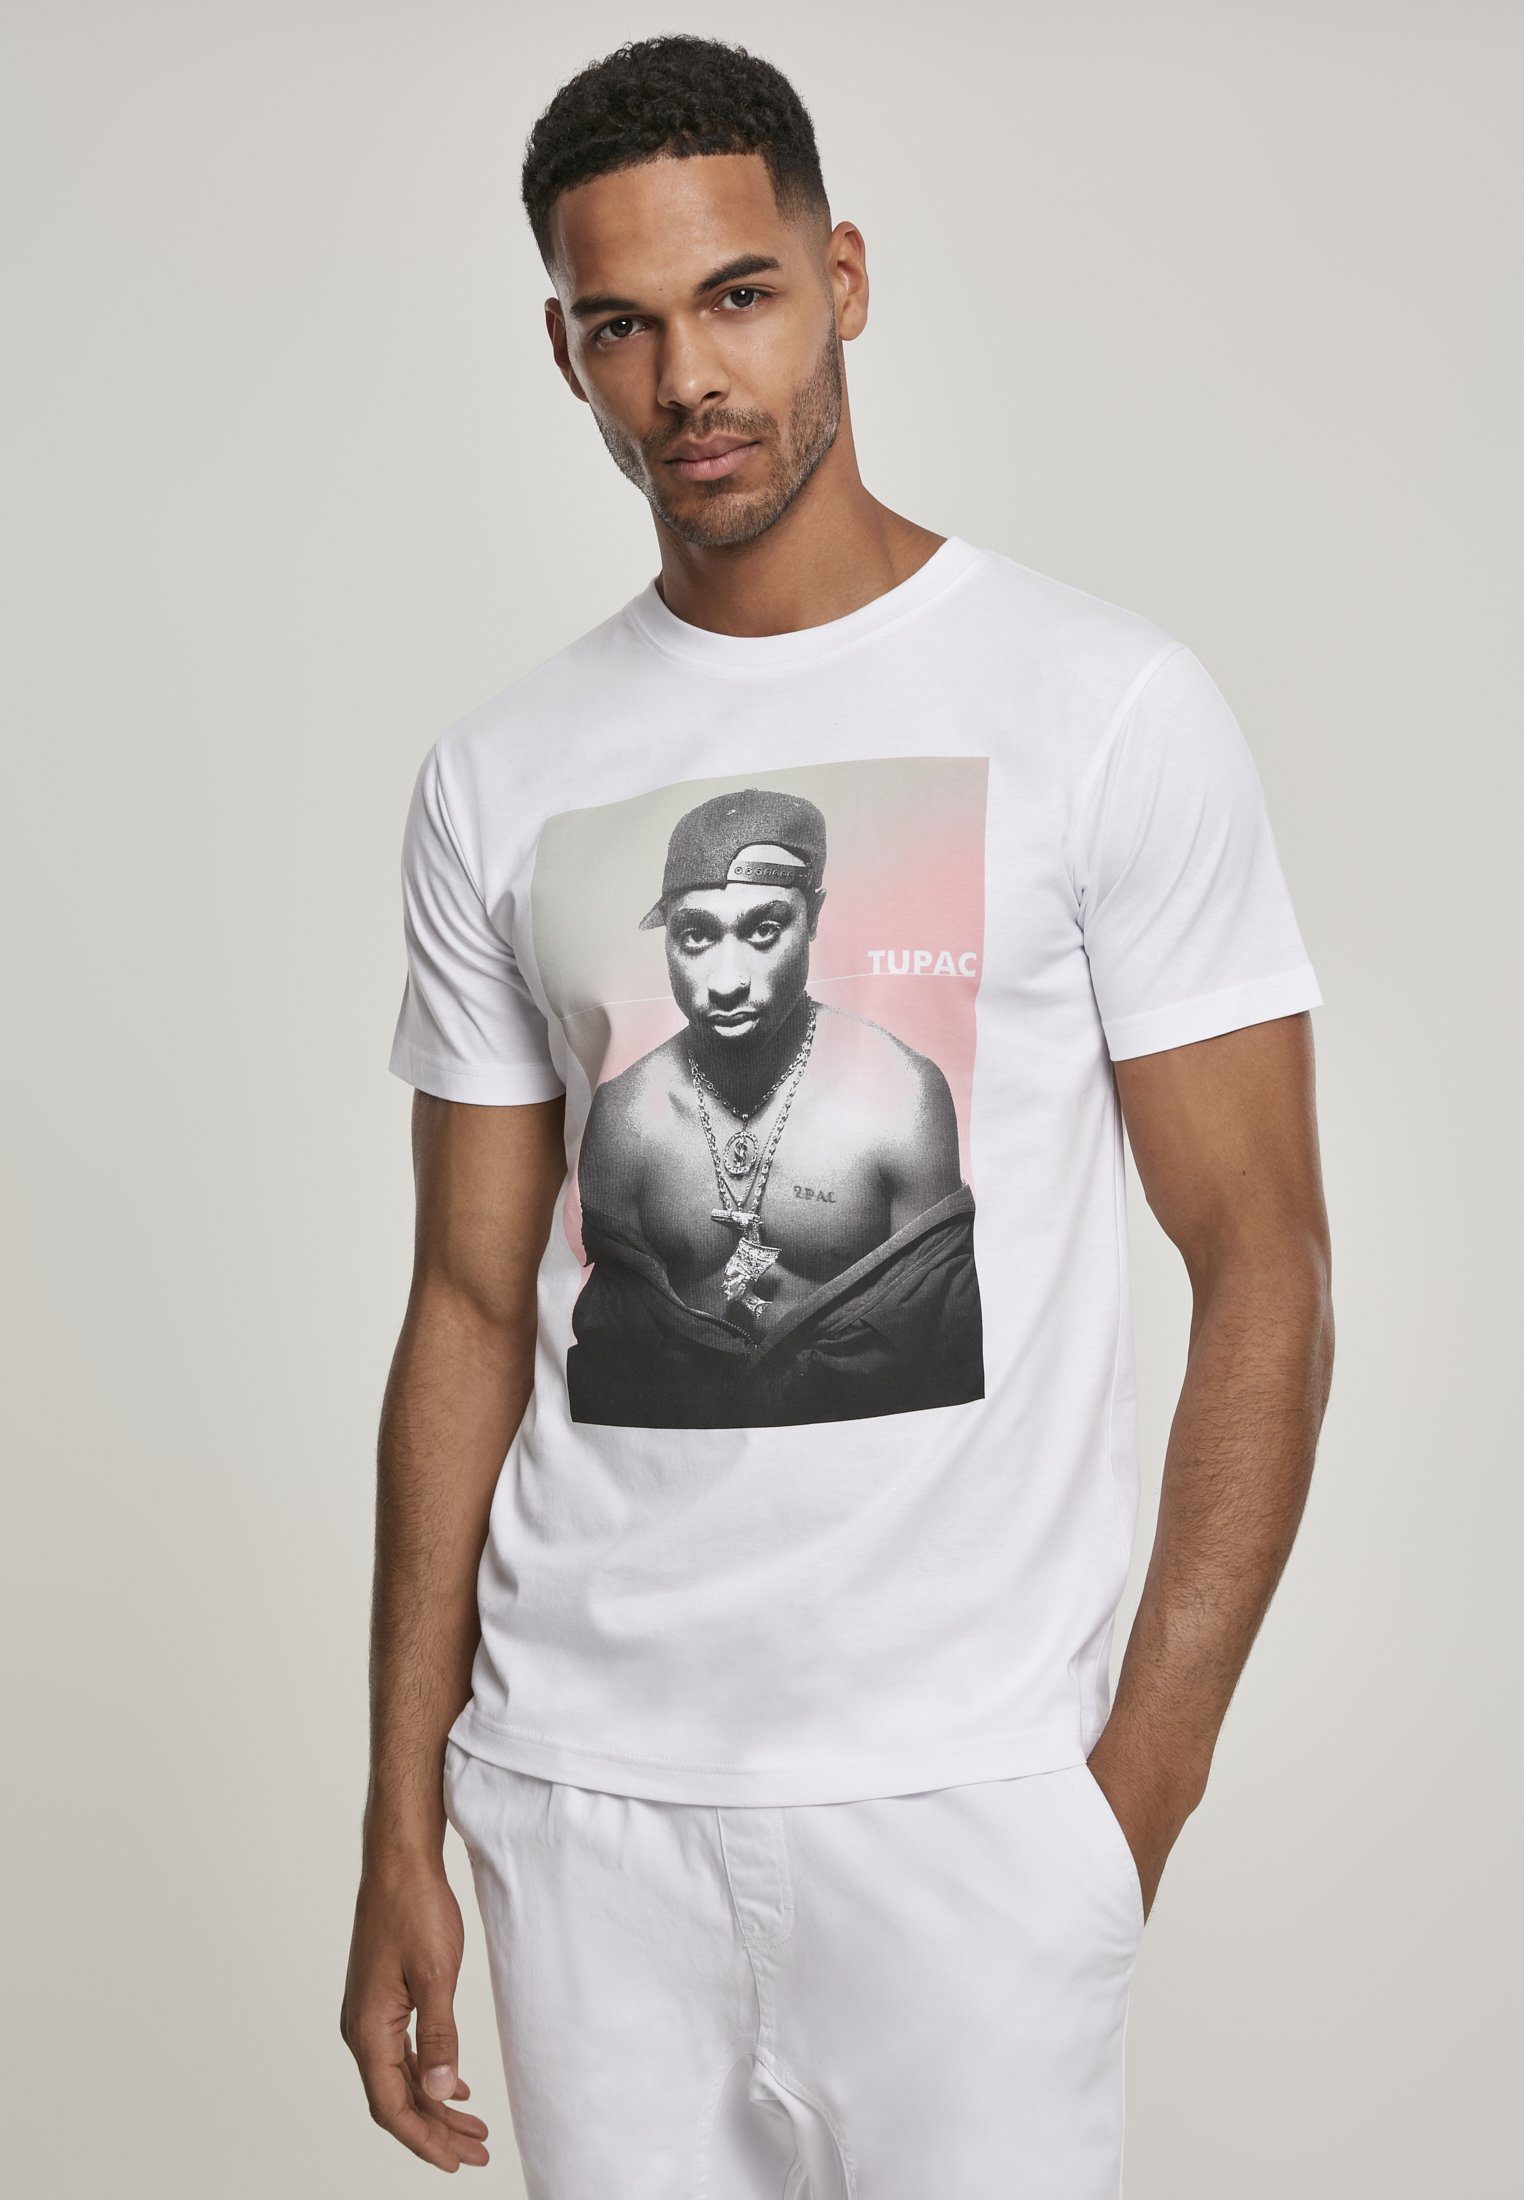 MisterTee T-Shirt Herren Tupac Afterglow Tee MT1010 Tupac Afterglow (1-tlg) white